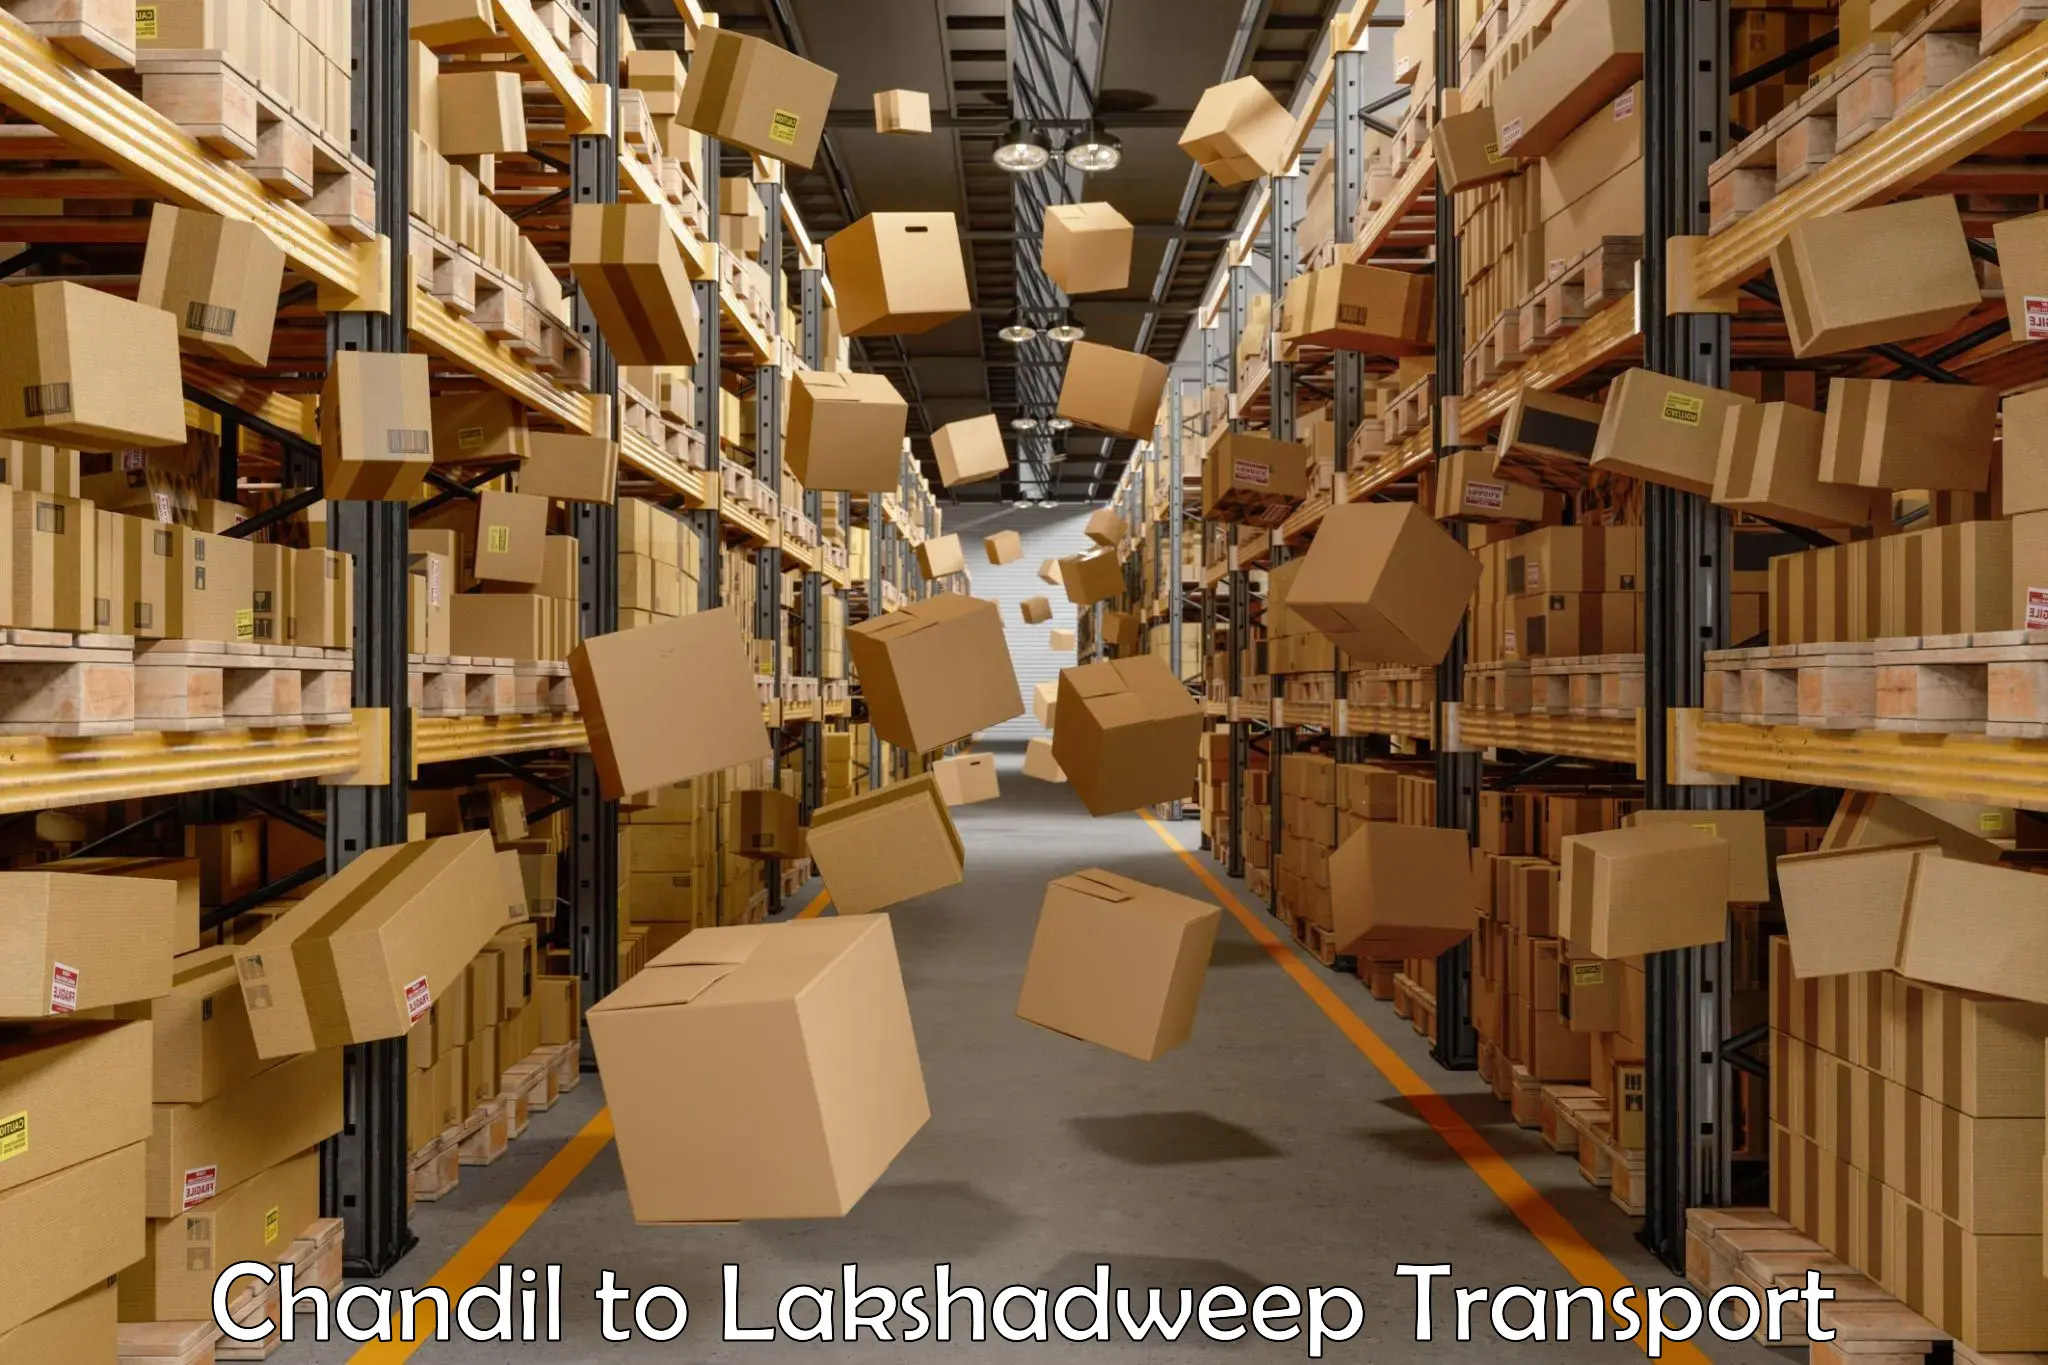 Part load transport service in India Chandil to Lakshadweep